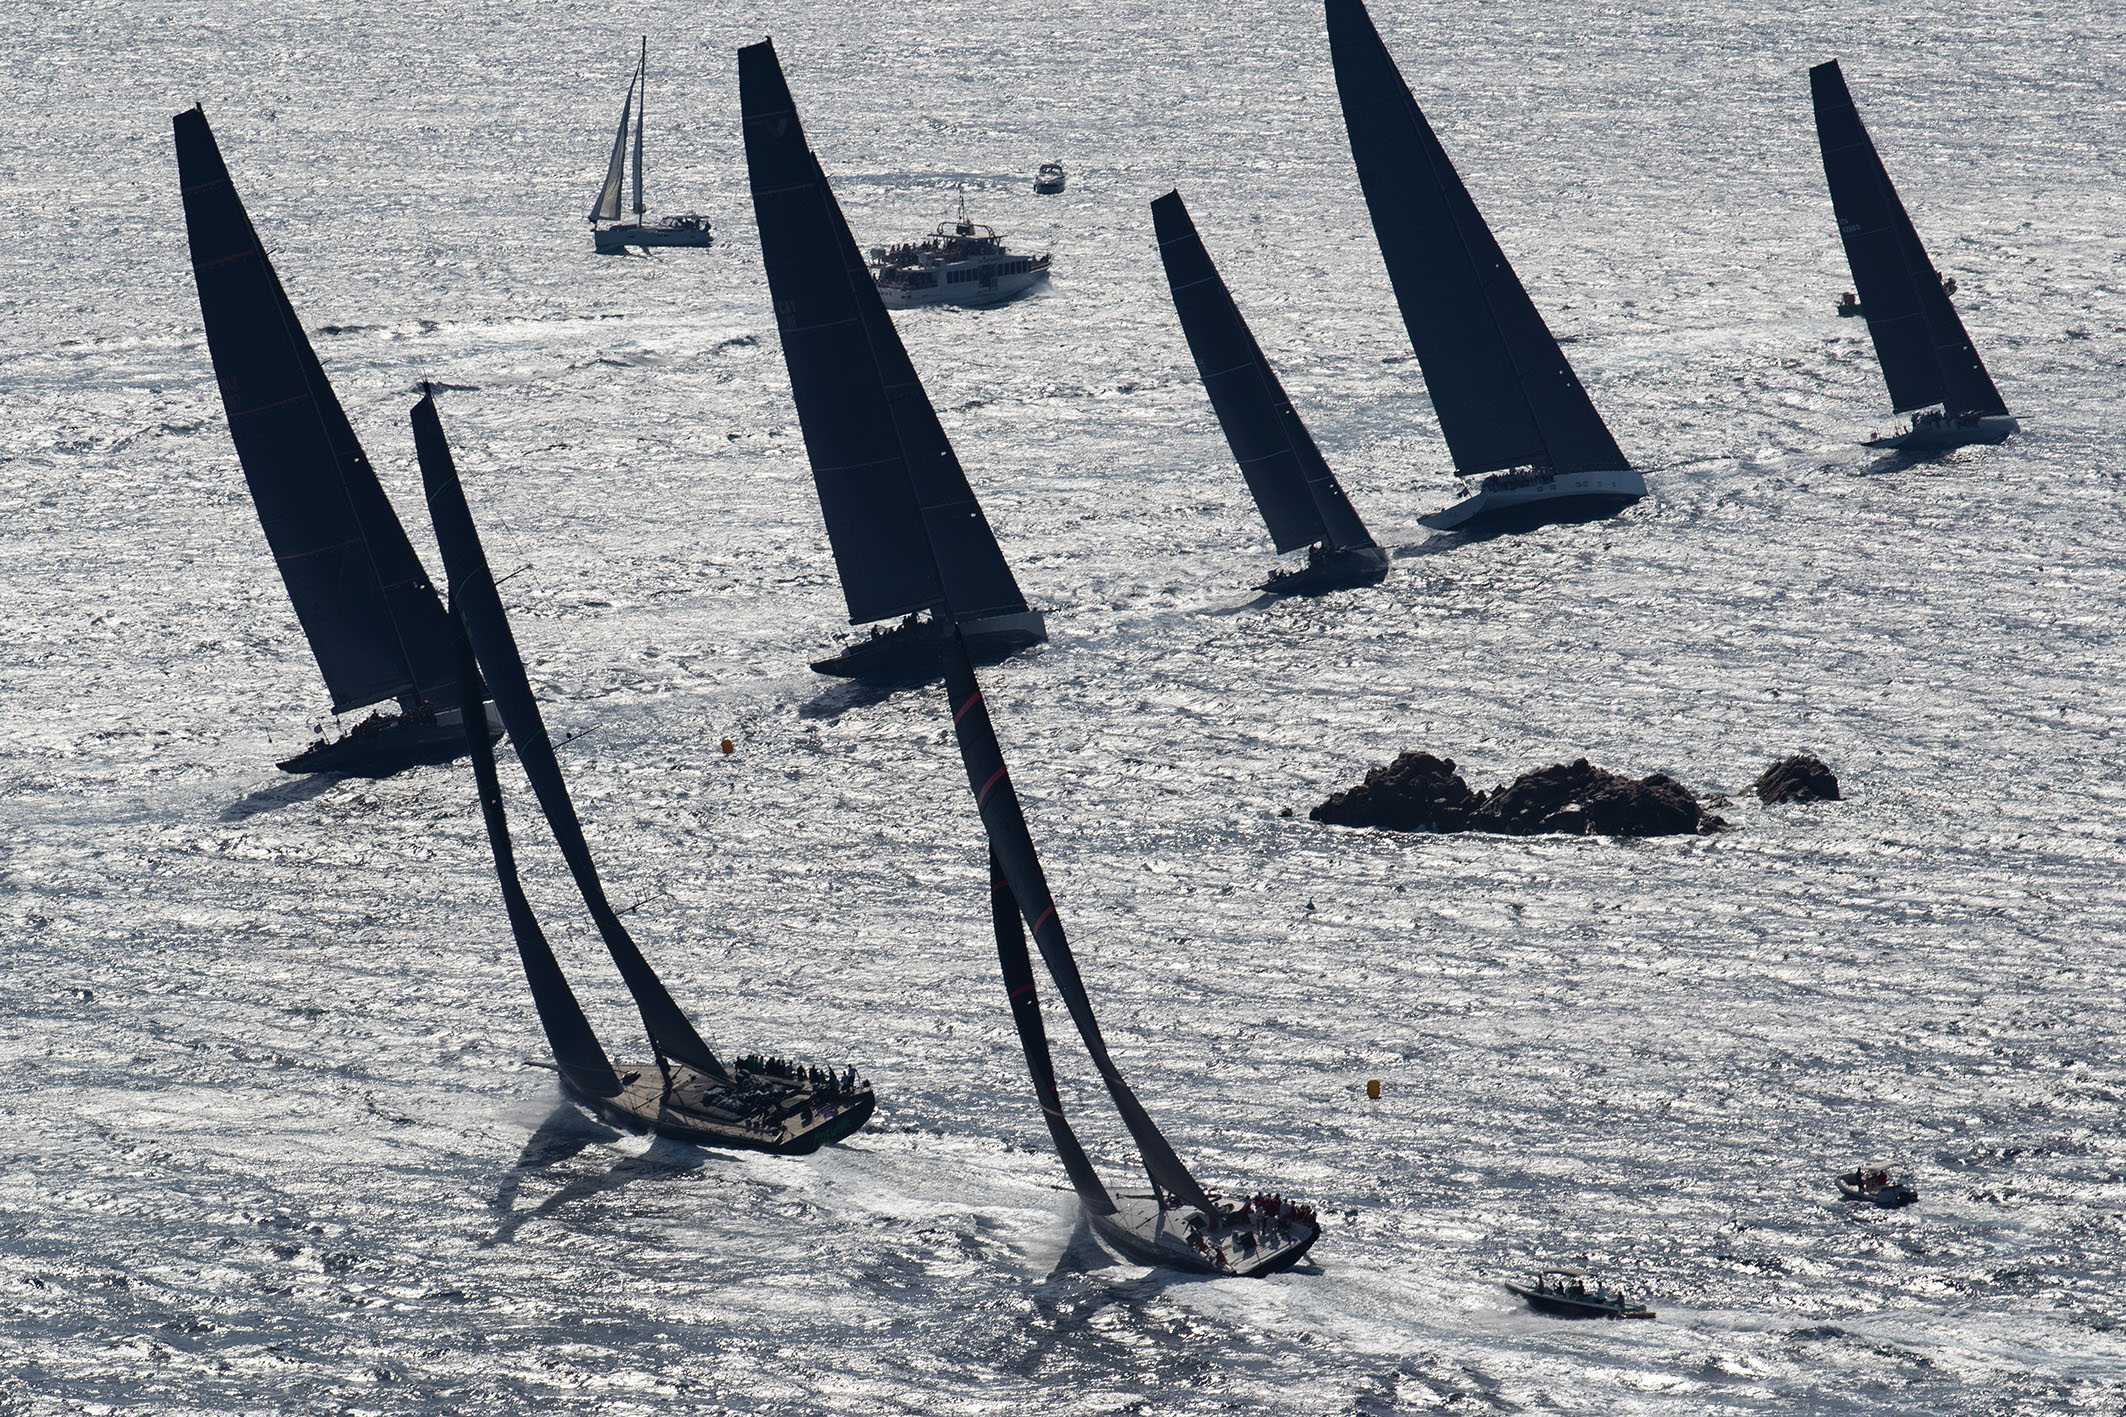 Packing more punch, ferocity and intensity than ever, Les Voiles is buzzing…